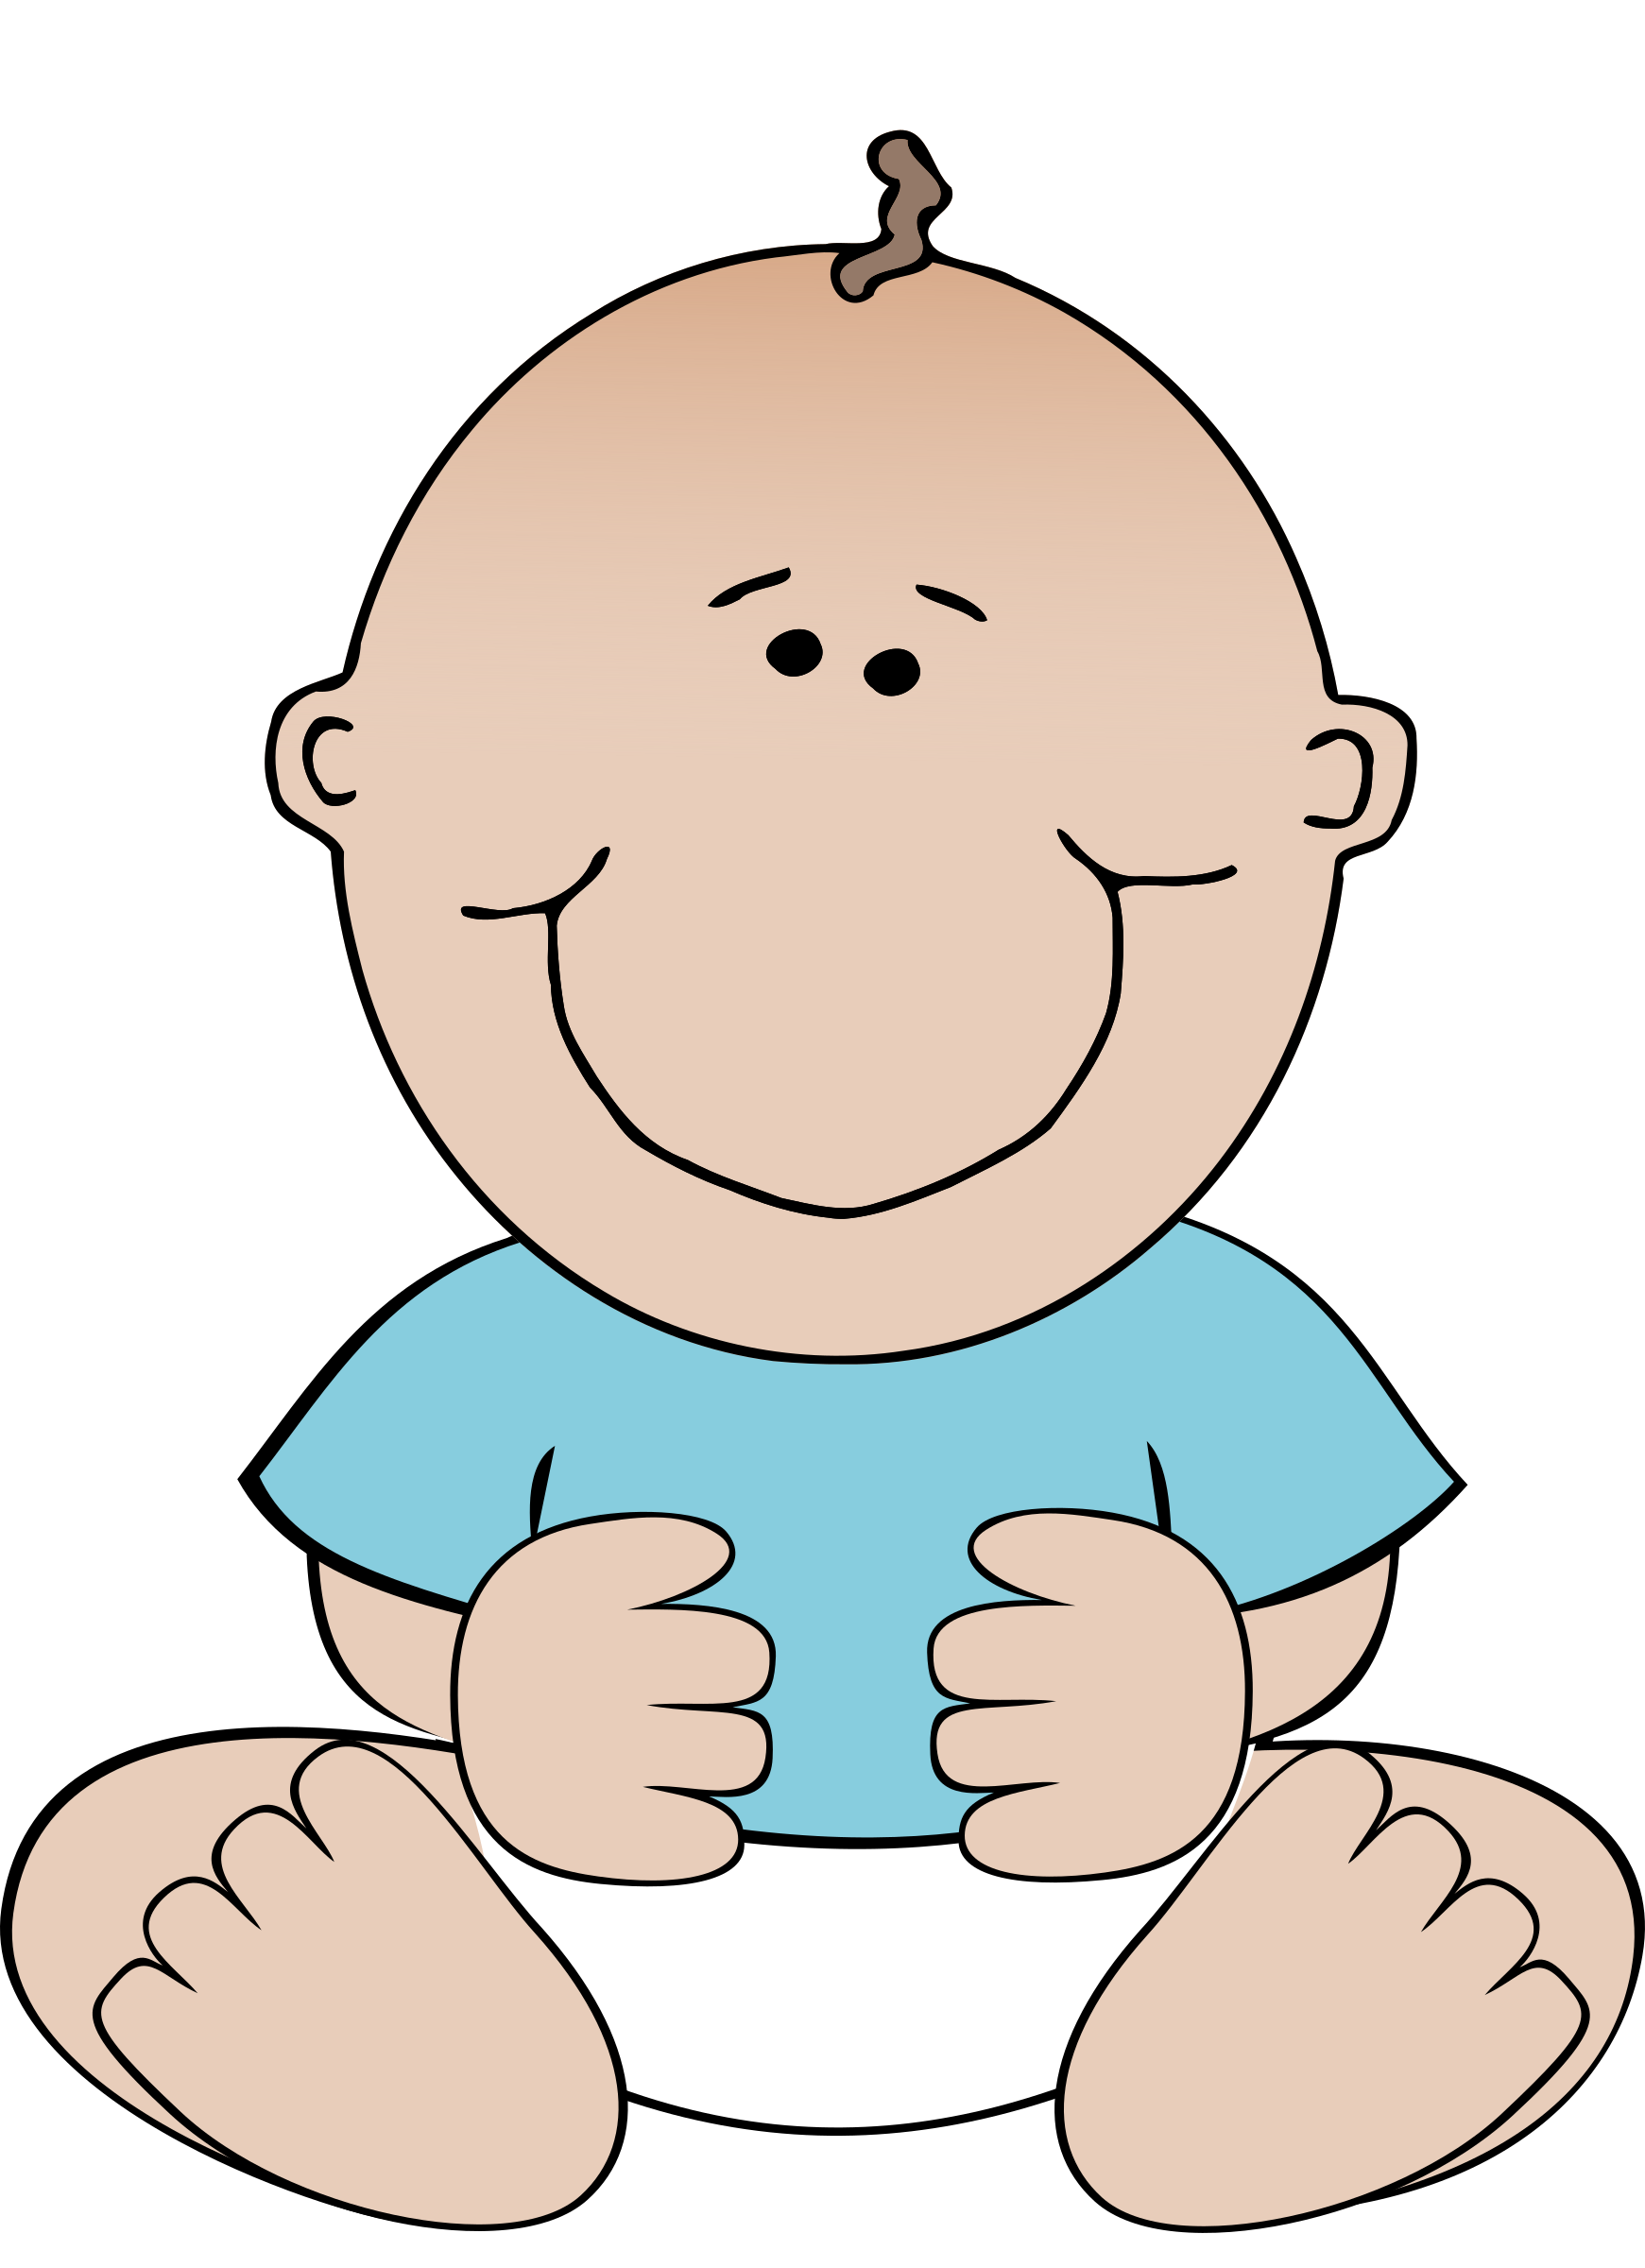 Baby Boy Sitting Vector Clipart image - Free stock photo ...